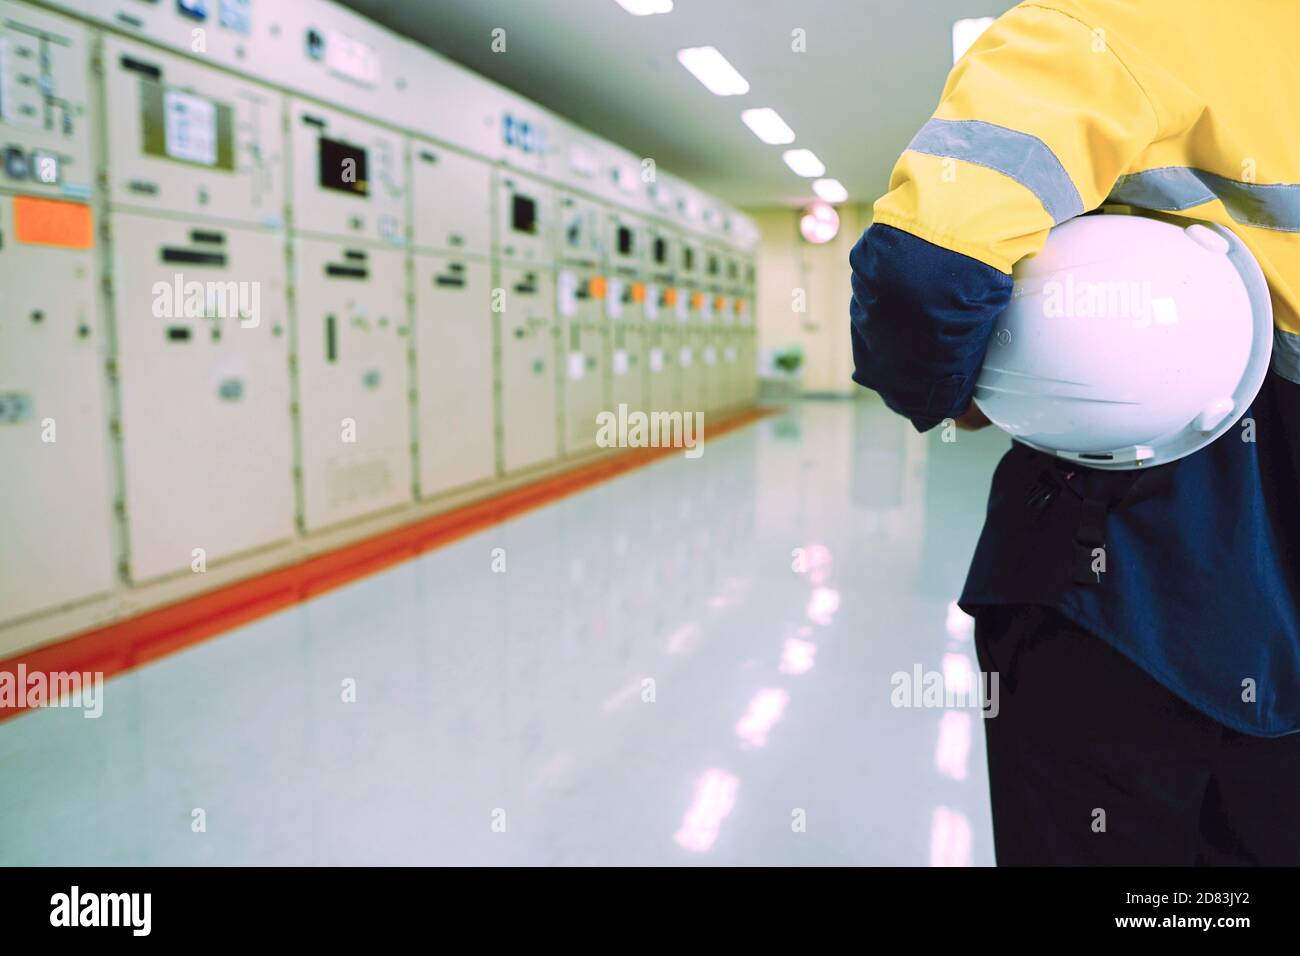 Male engineer wearing a yellow uniform and wearing a white safety hat, inspecting electrical systems in a large power plant. Stock Photo